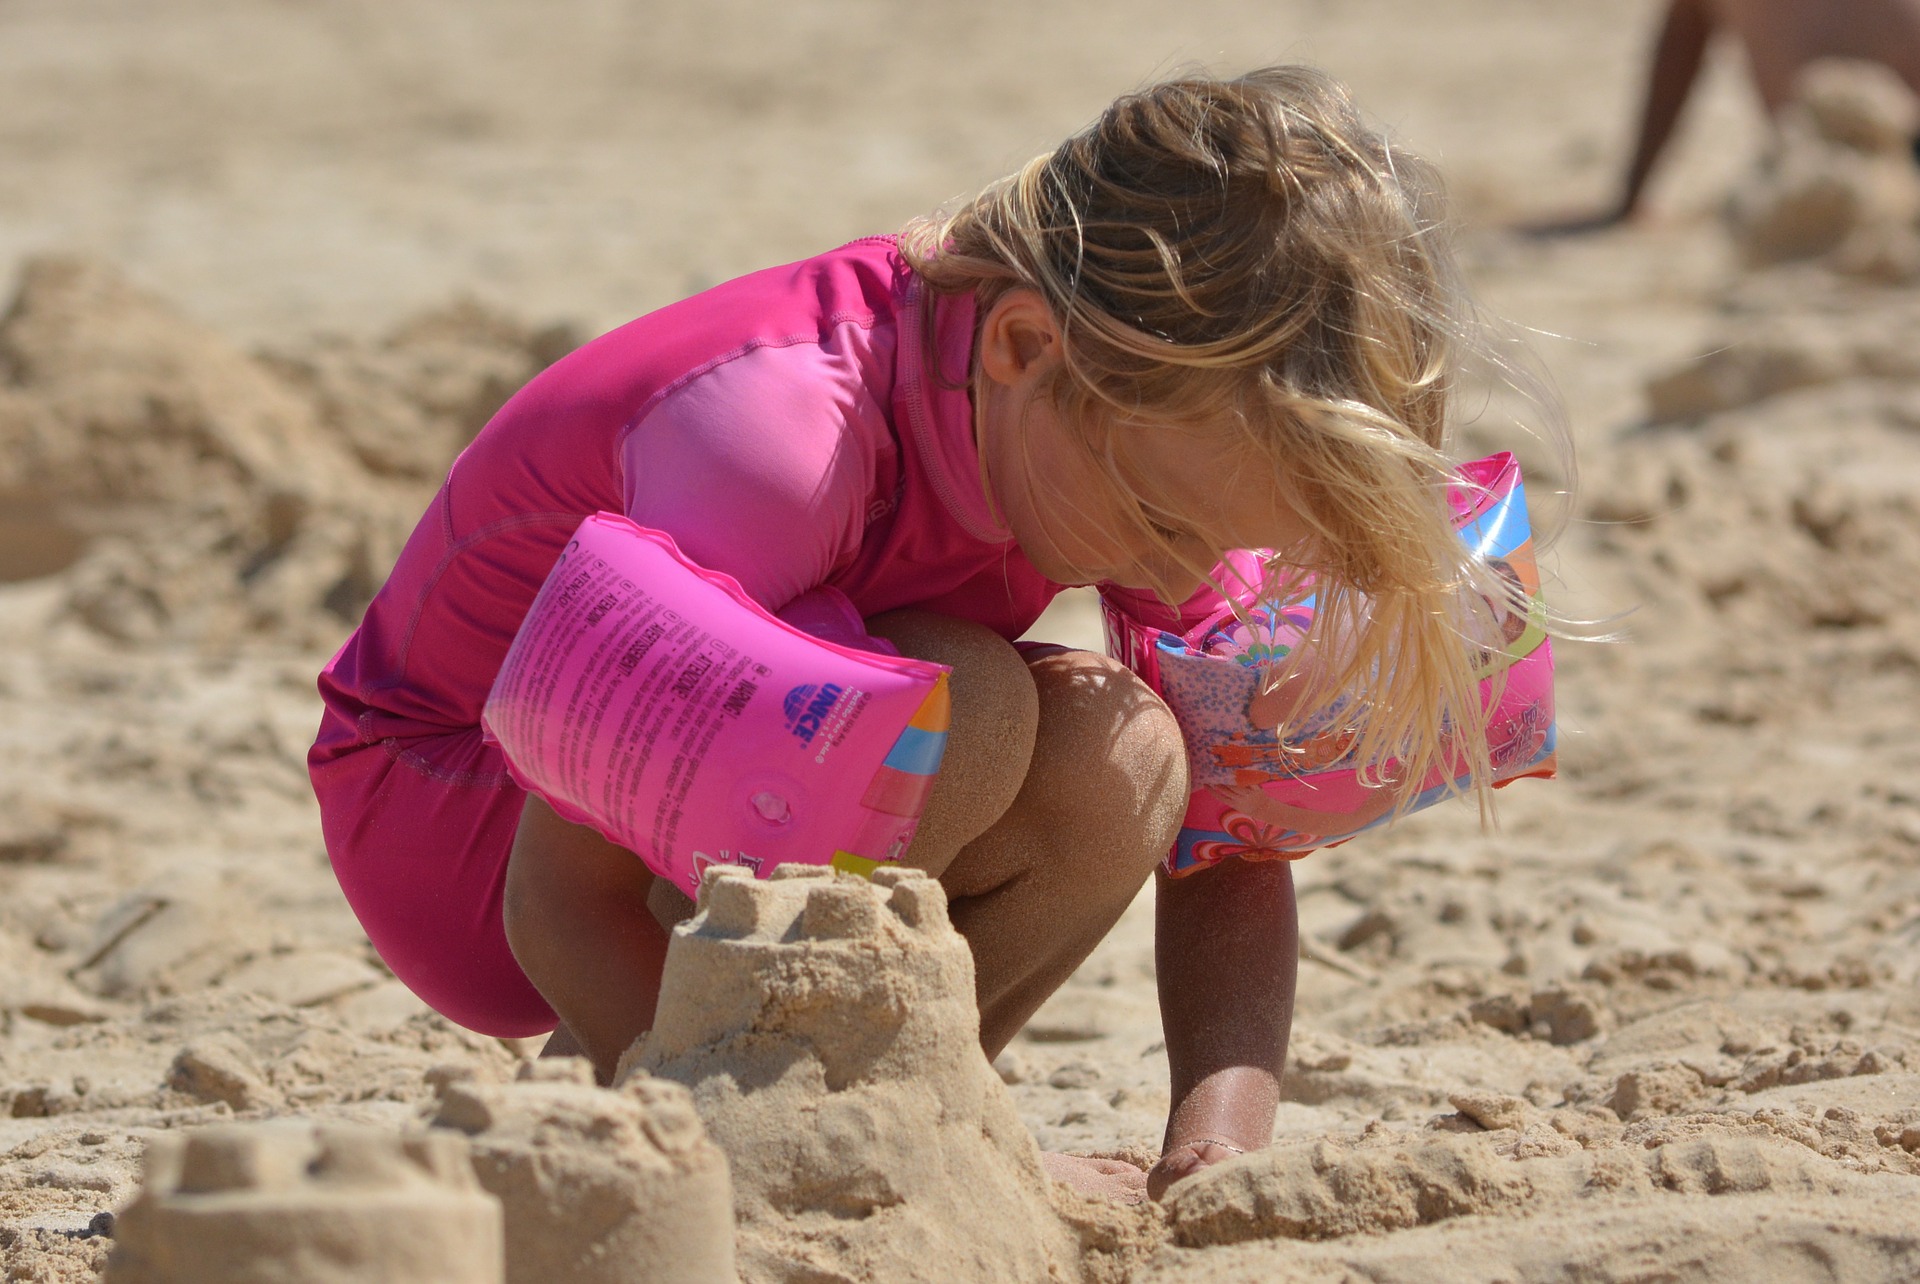 A child in pink playing in the sand building sandcastles